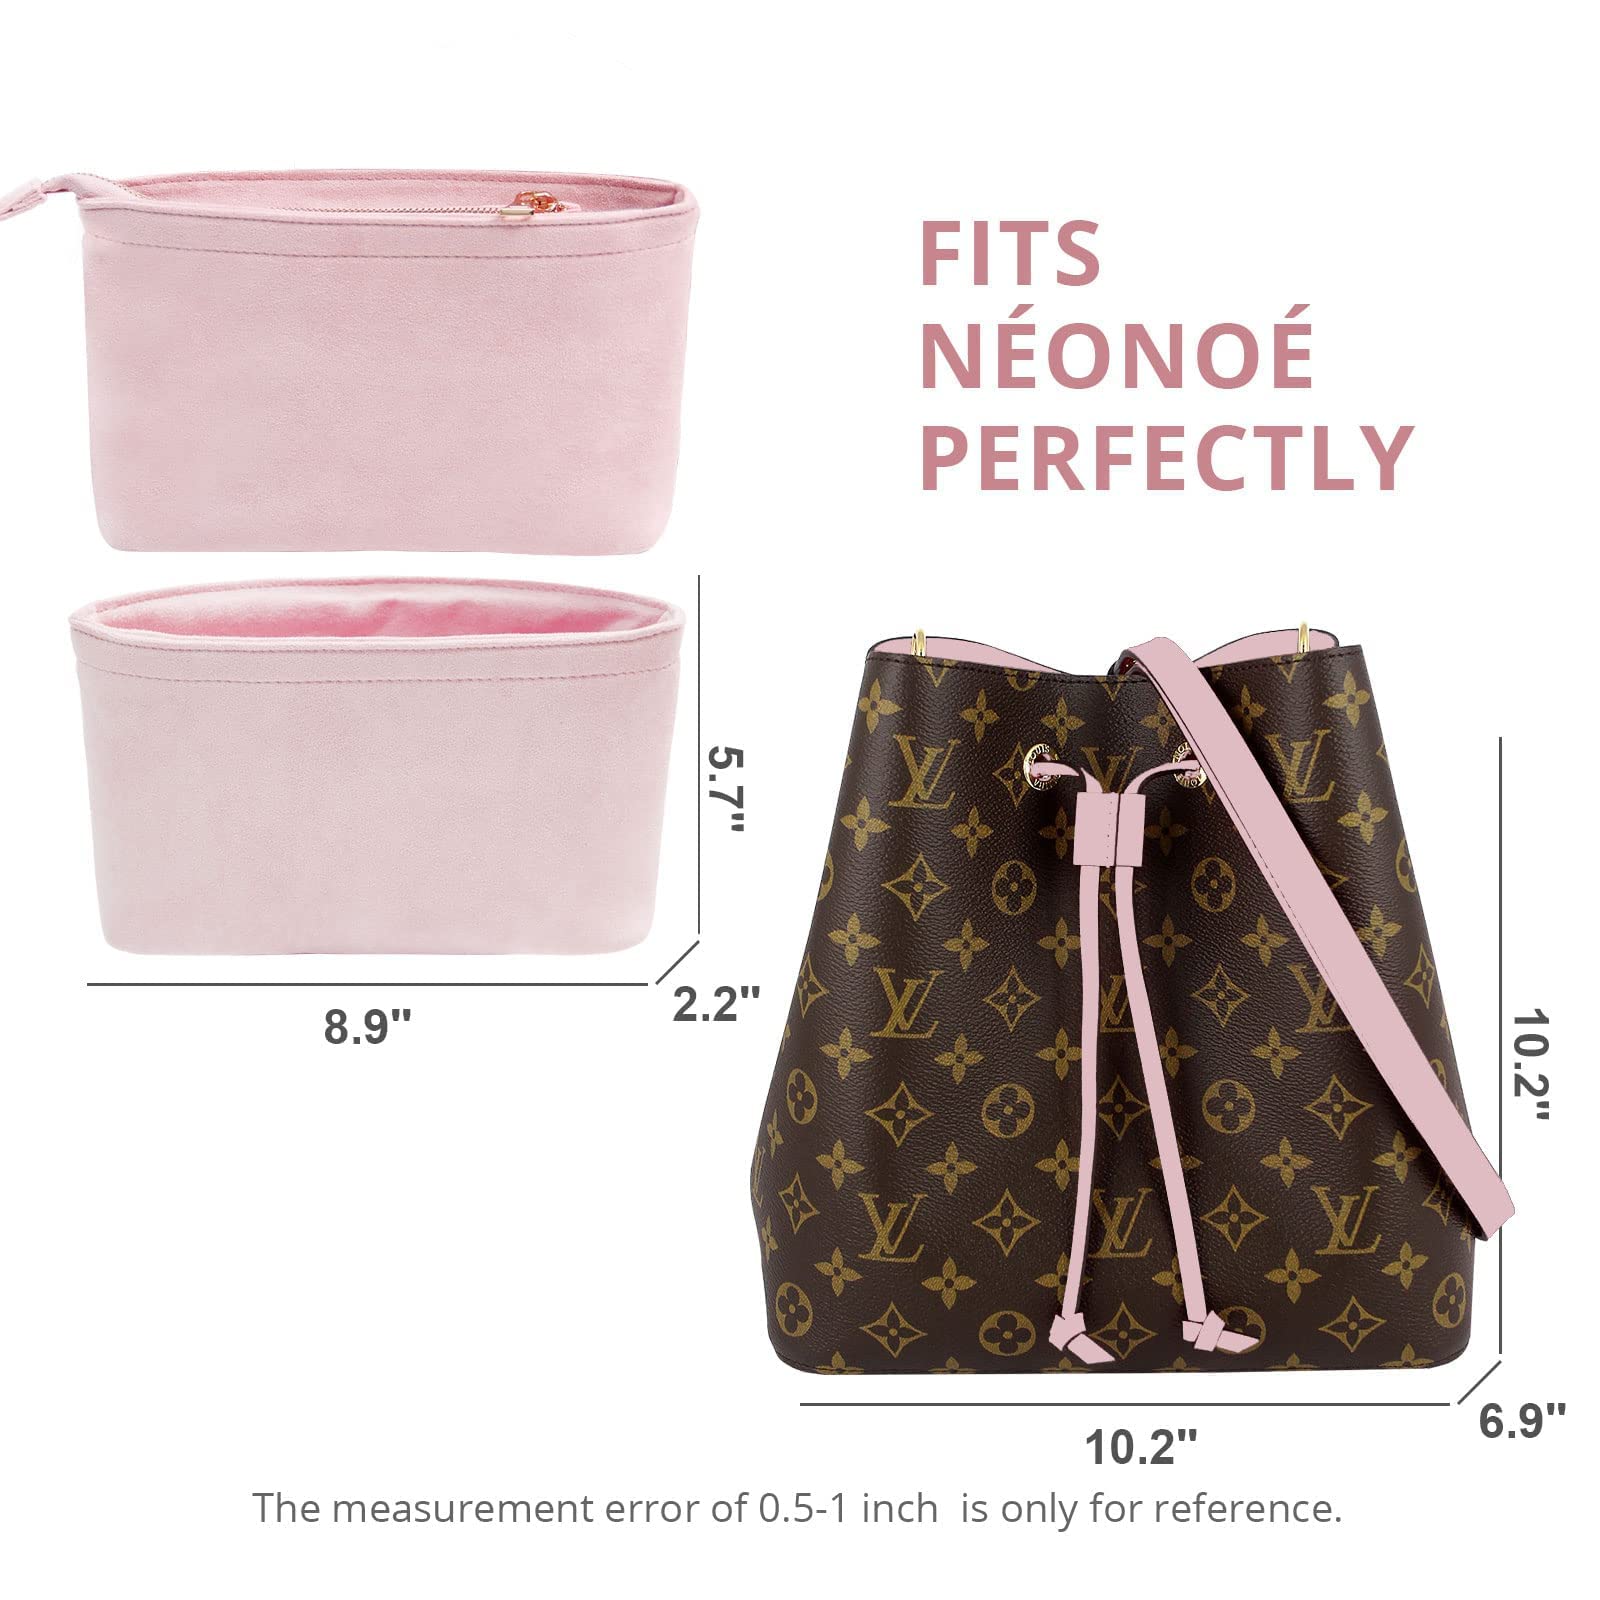 Louis Vuitton Neo Noe ~Purse Organizer 2 pack My thoughts 